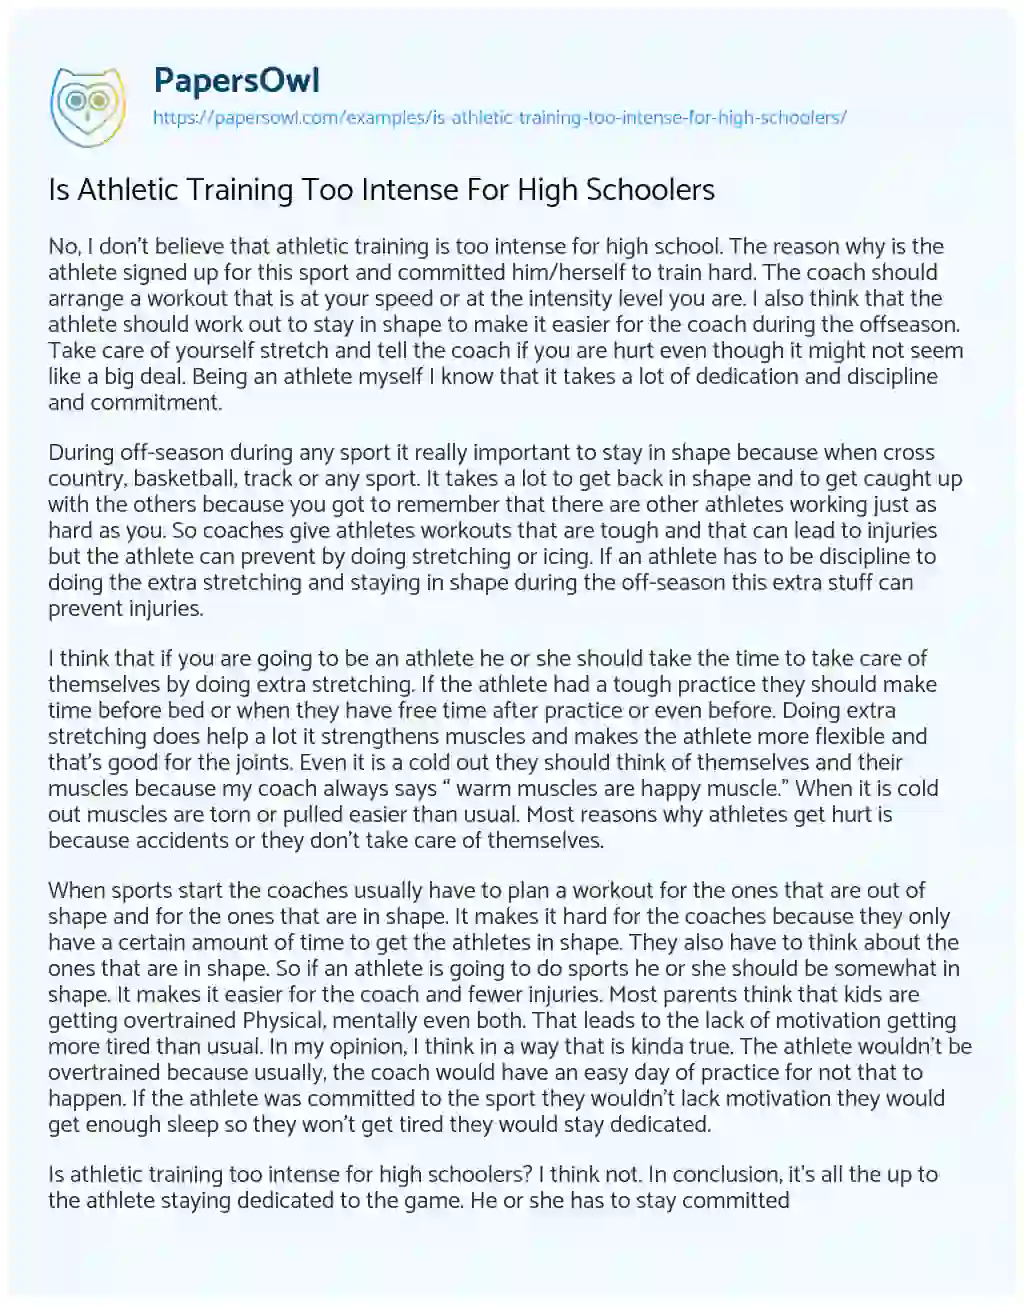 Is Athletic Training Too Intense for High Schoolers  essay